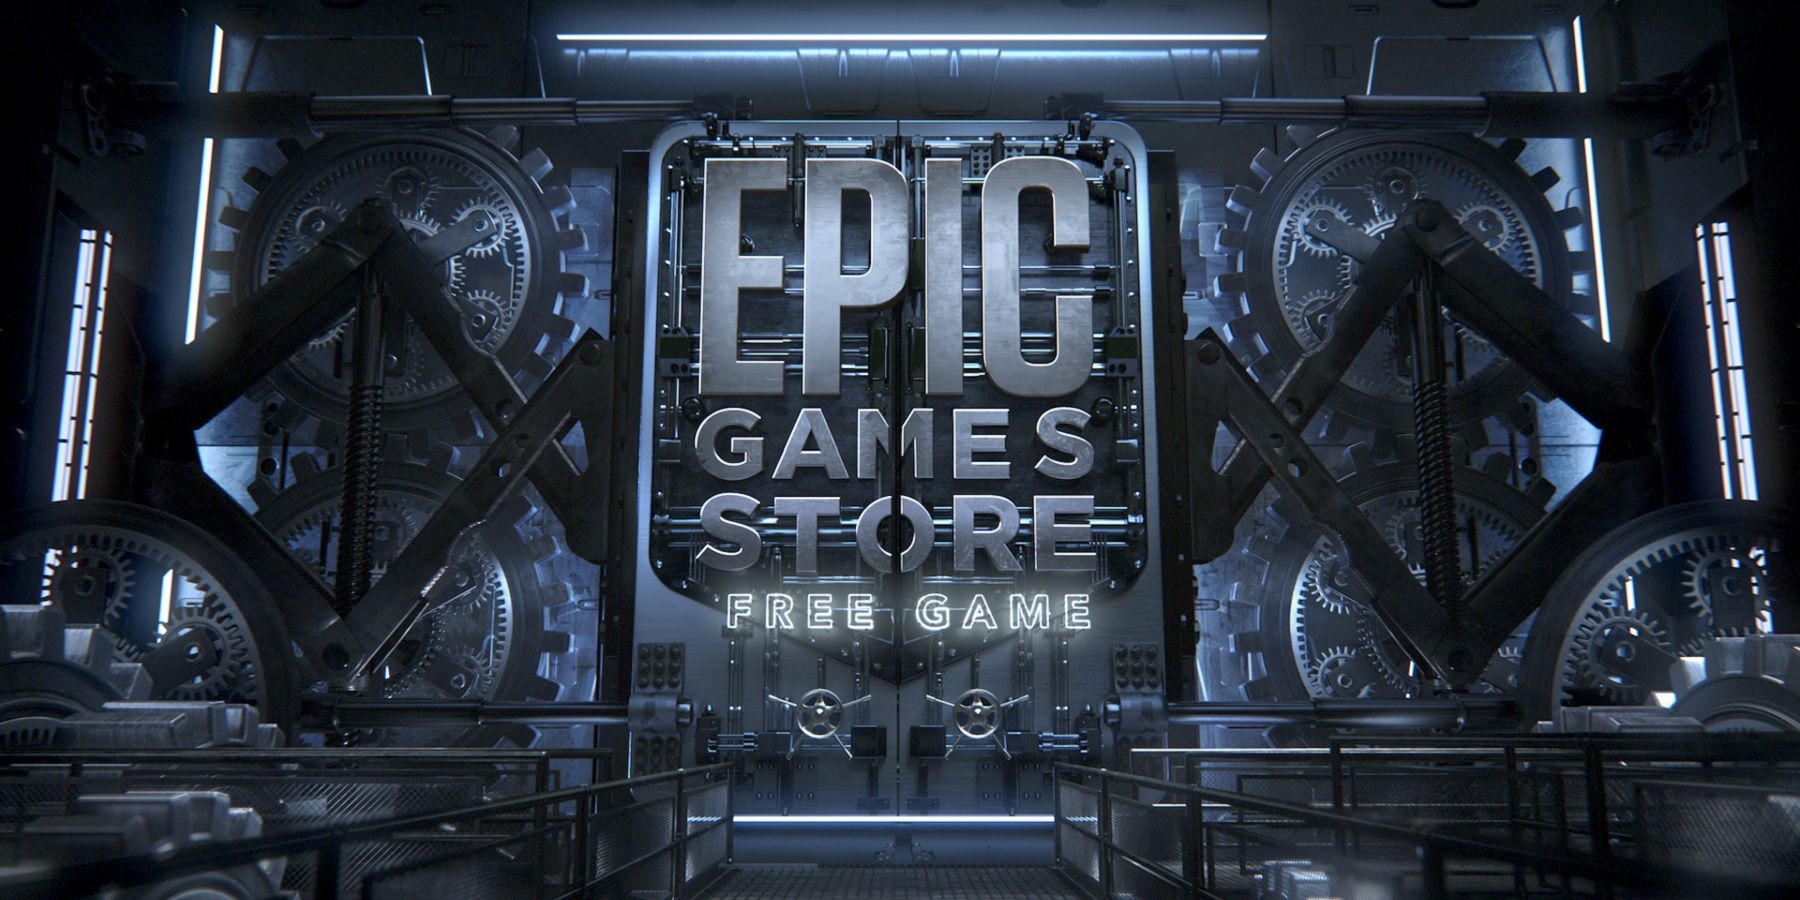 Epic free games leak - 20th December game is Wolfenstein: The New